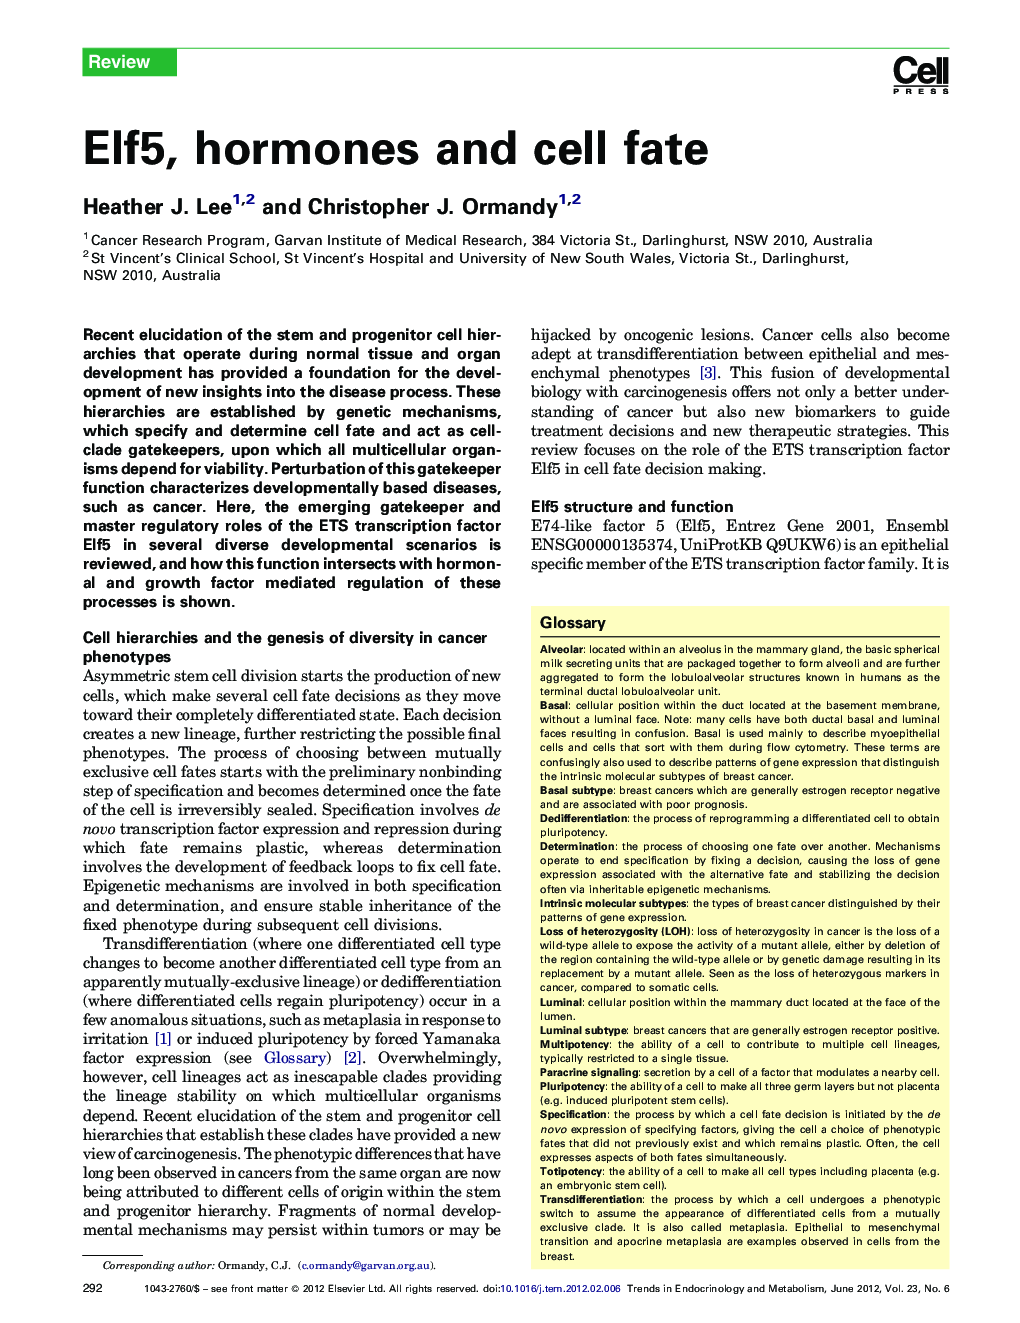 Elf5, hormones and cell fate